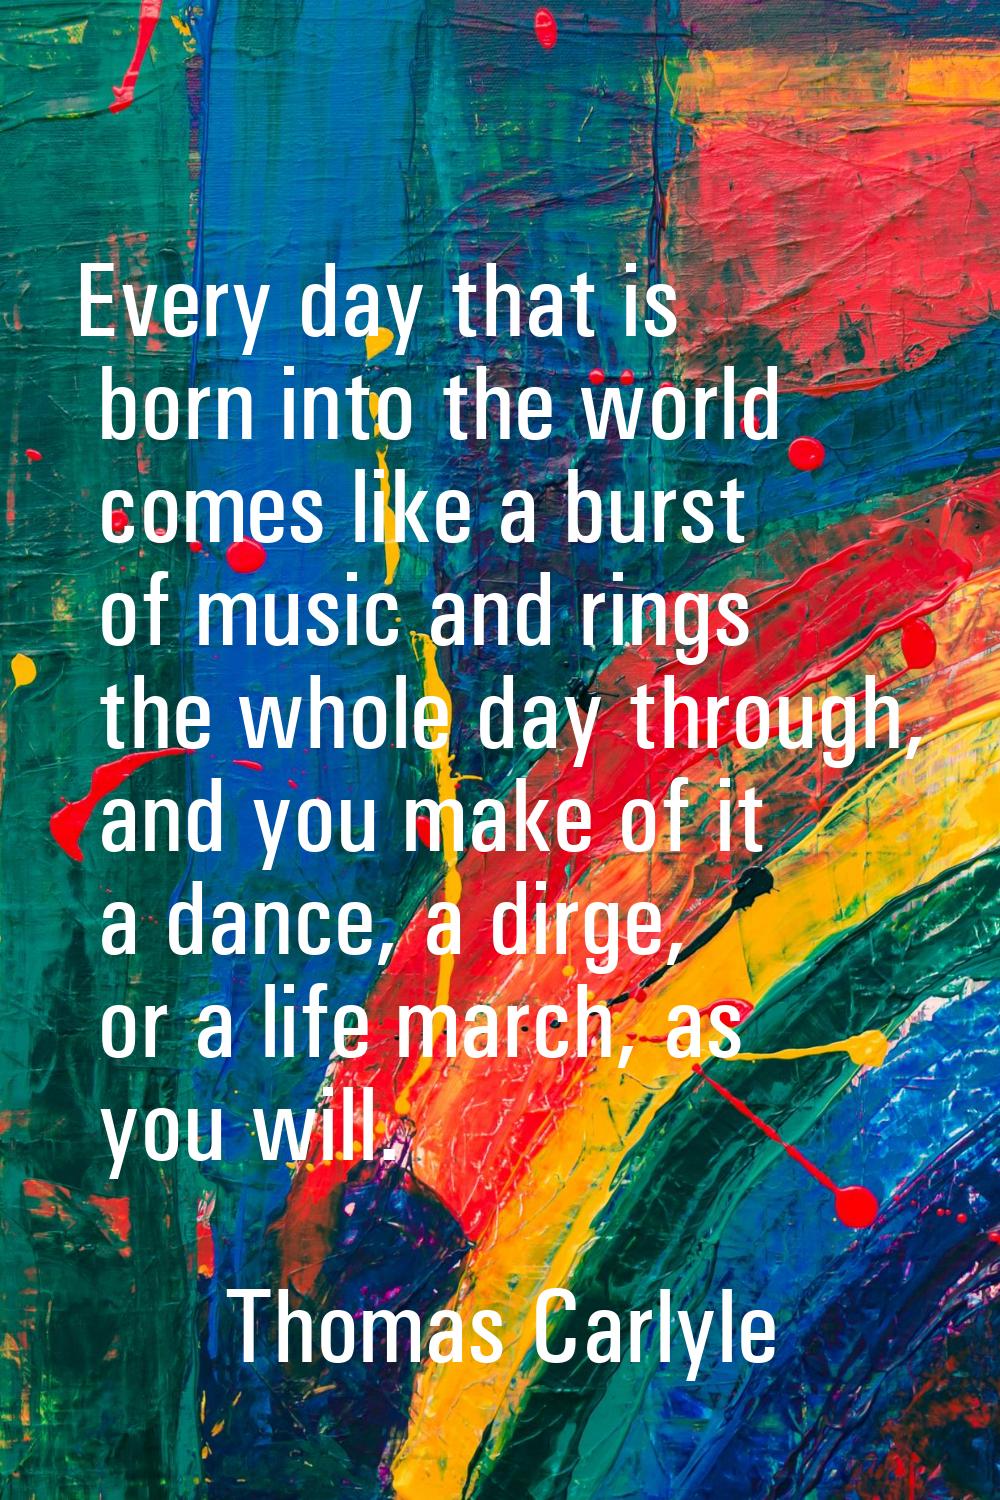 Every day that is born into the world comes like a burst of music and rings the whole day through, 